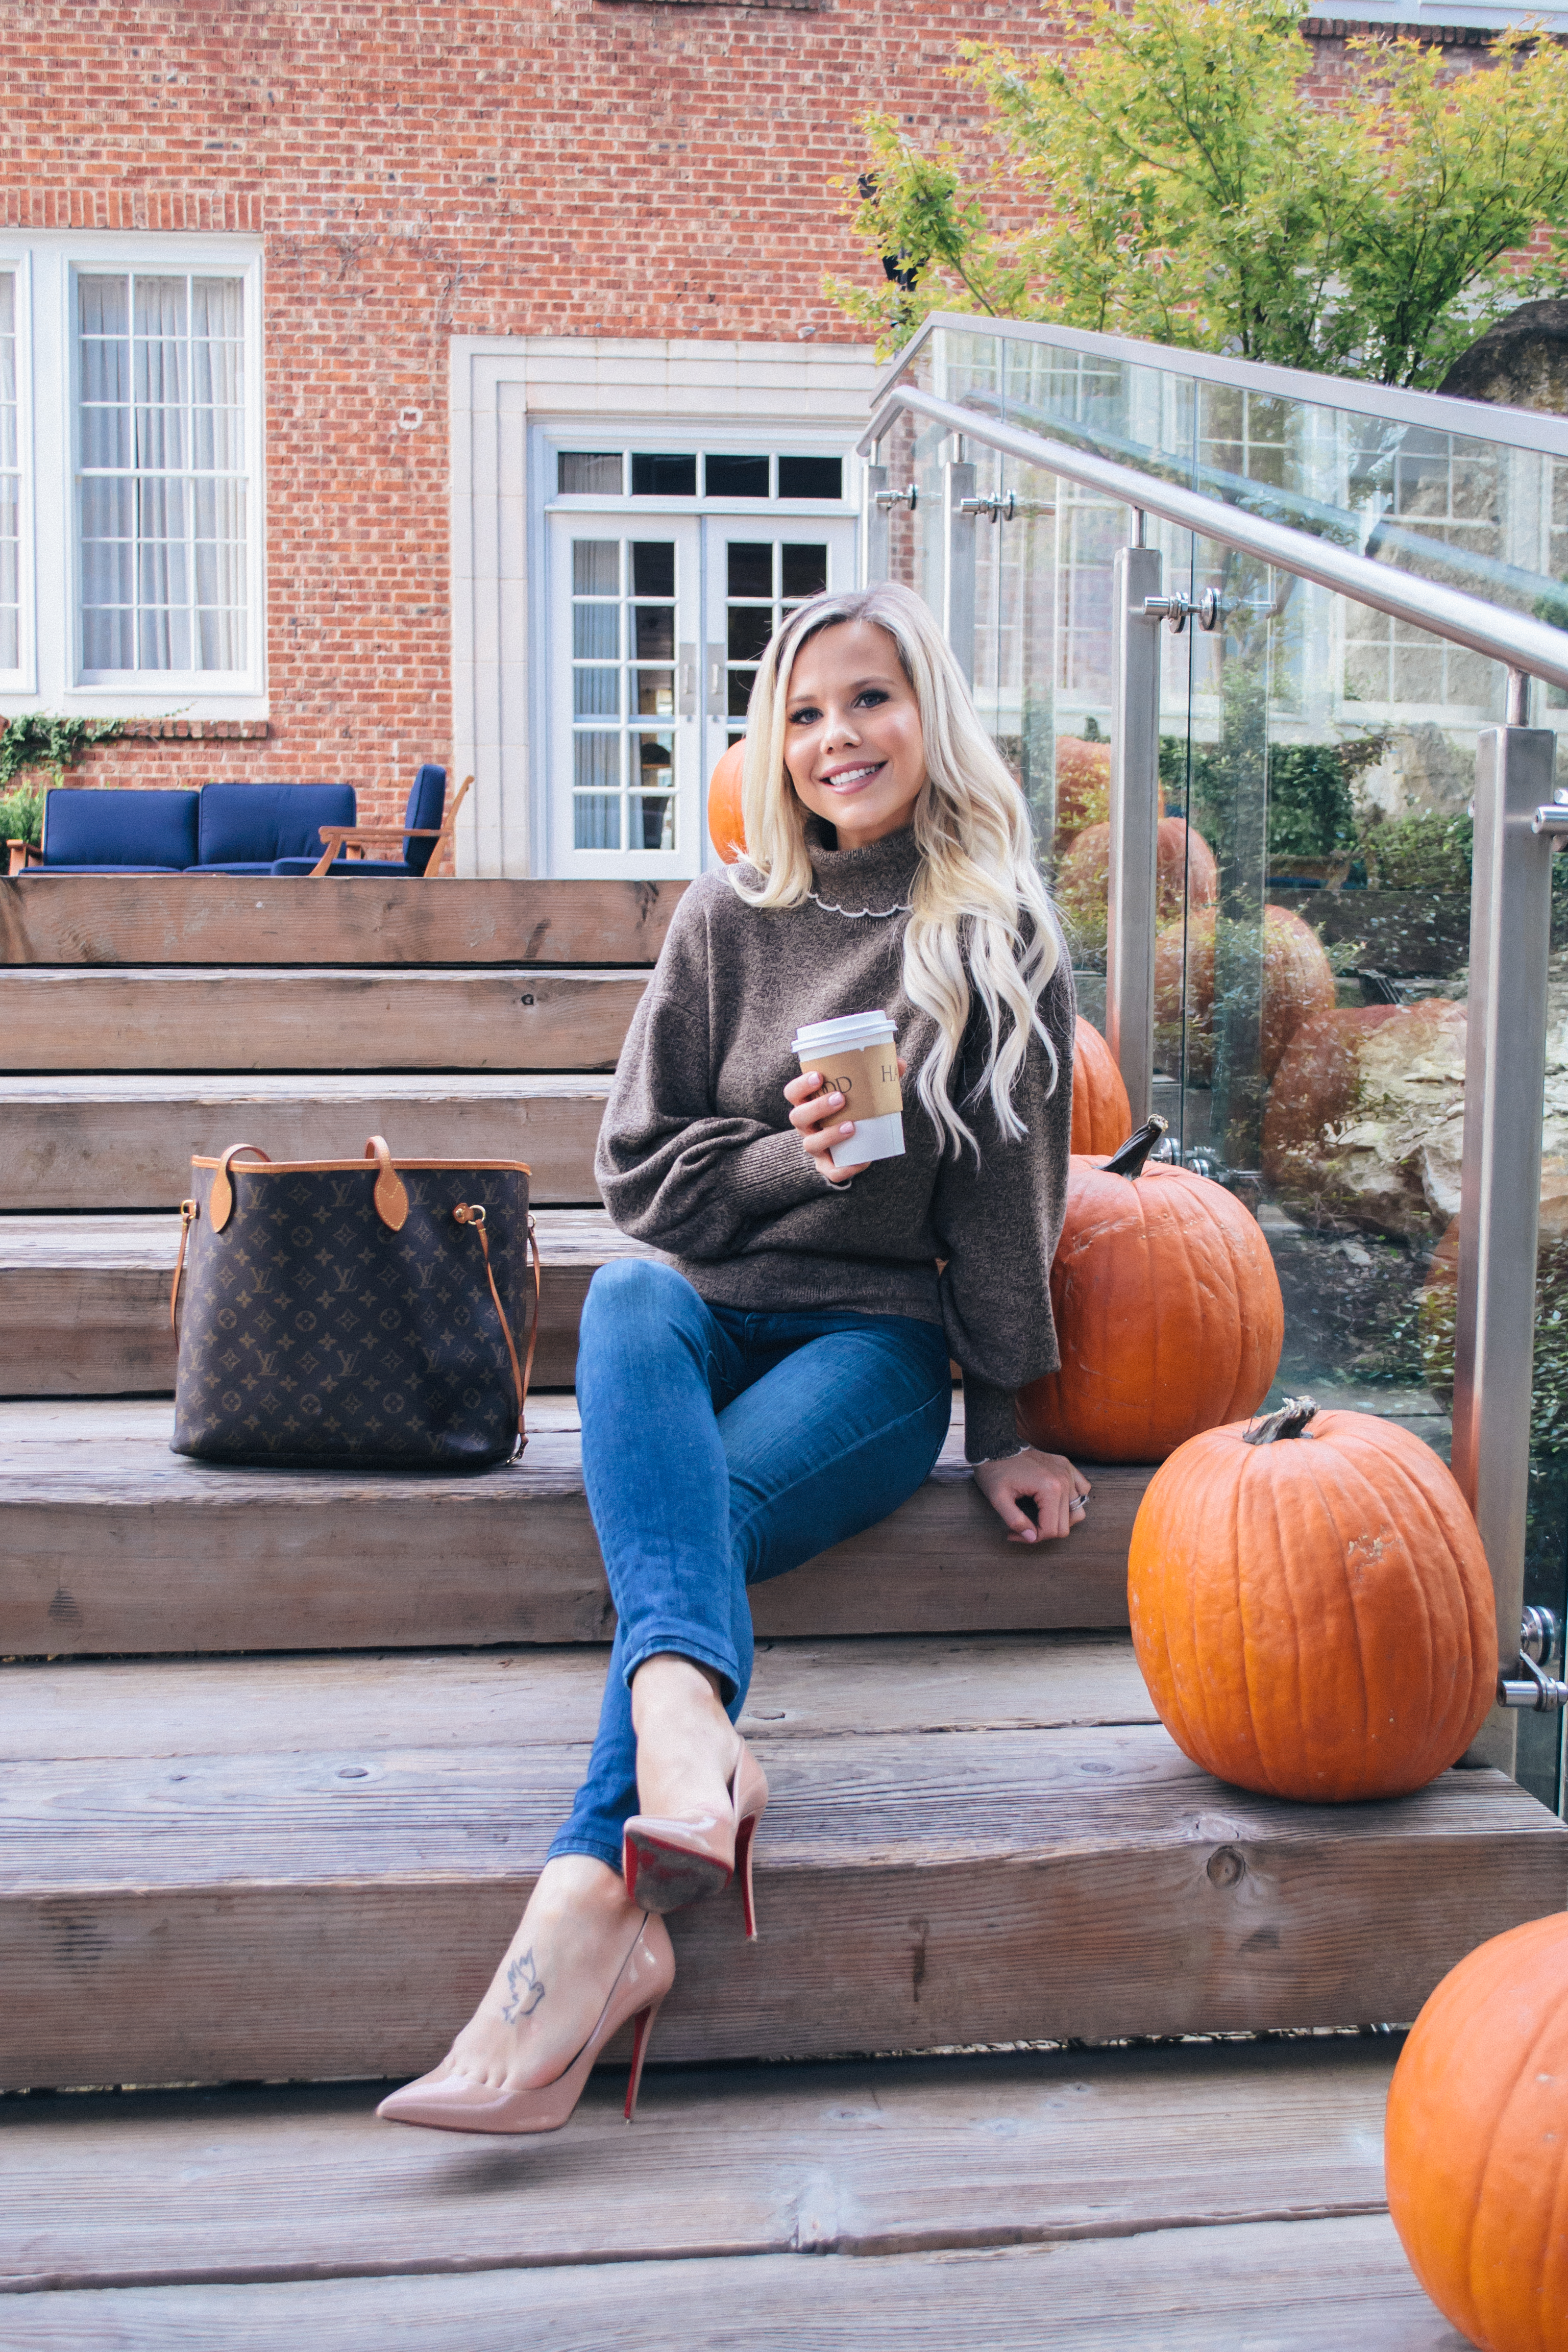 Casual and cute pumpkin patch outfit #falloutfit #fall #fashion #fallstyle #pumpkinpatch